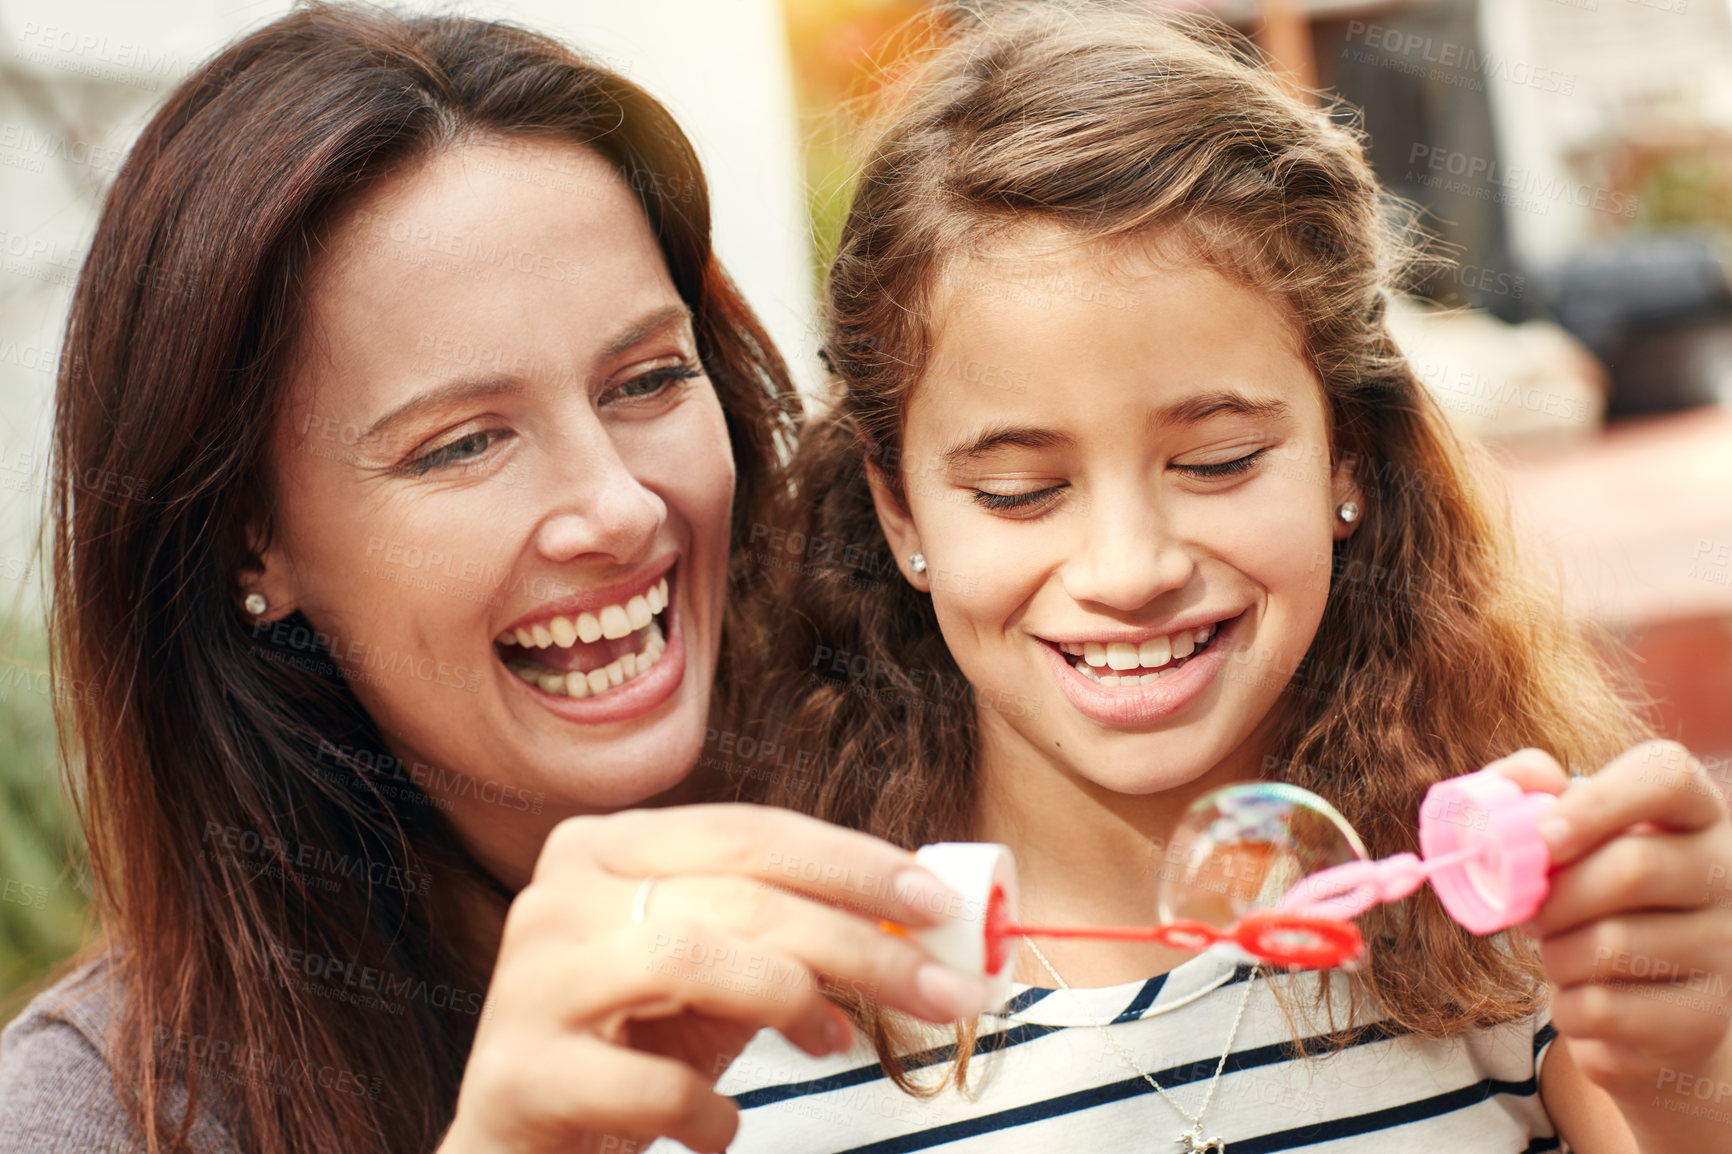 Buy stock photo A happy mother and daughter spending time together outdoors